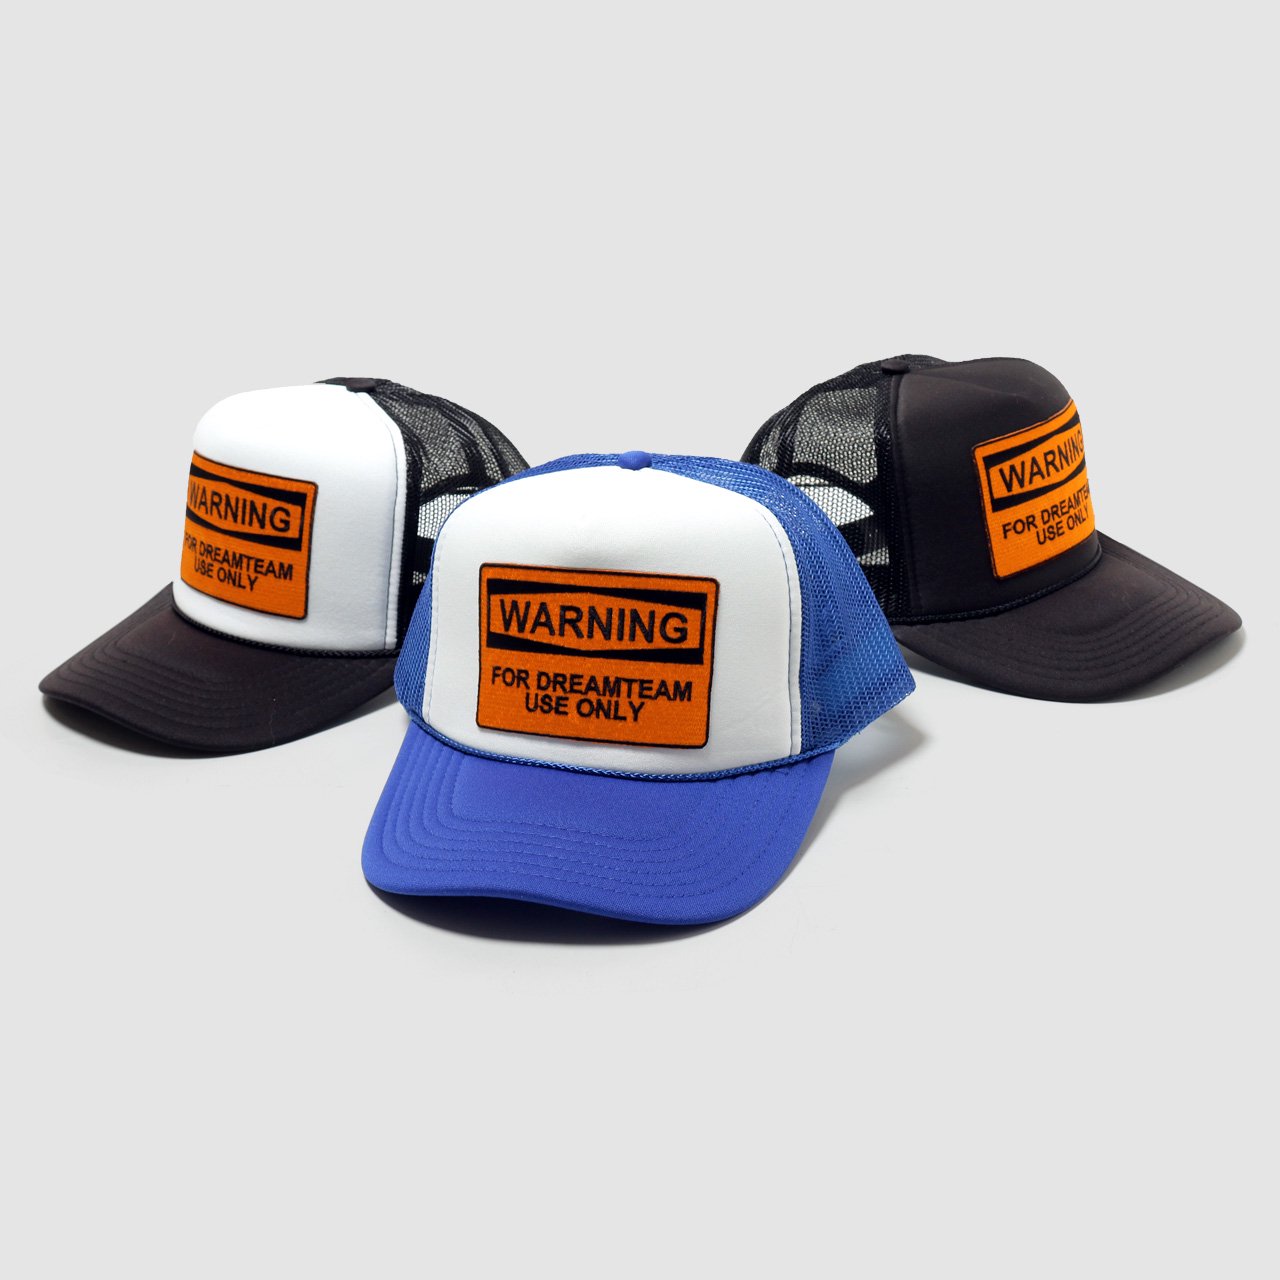 WARNING DT Use Only  Mesh Cap